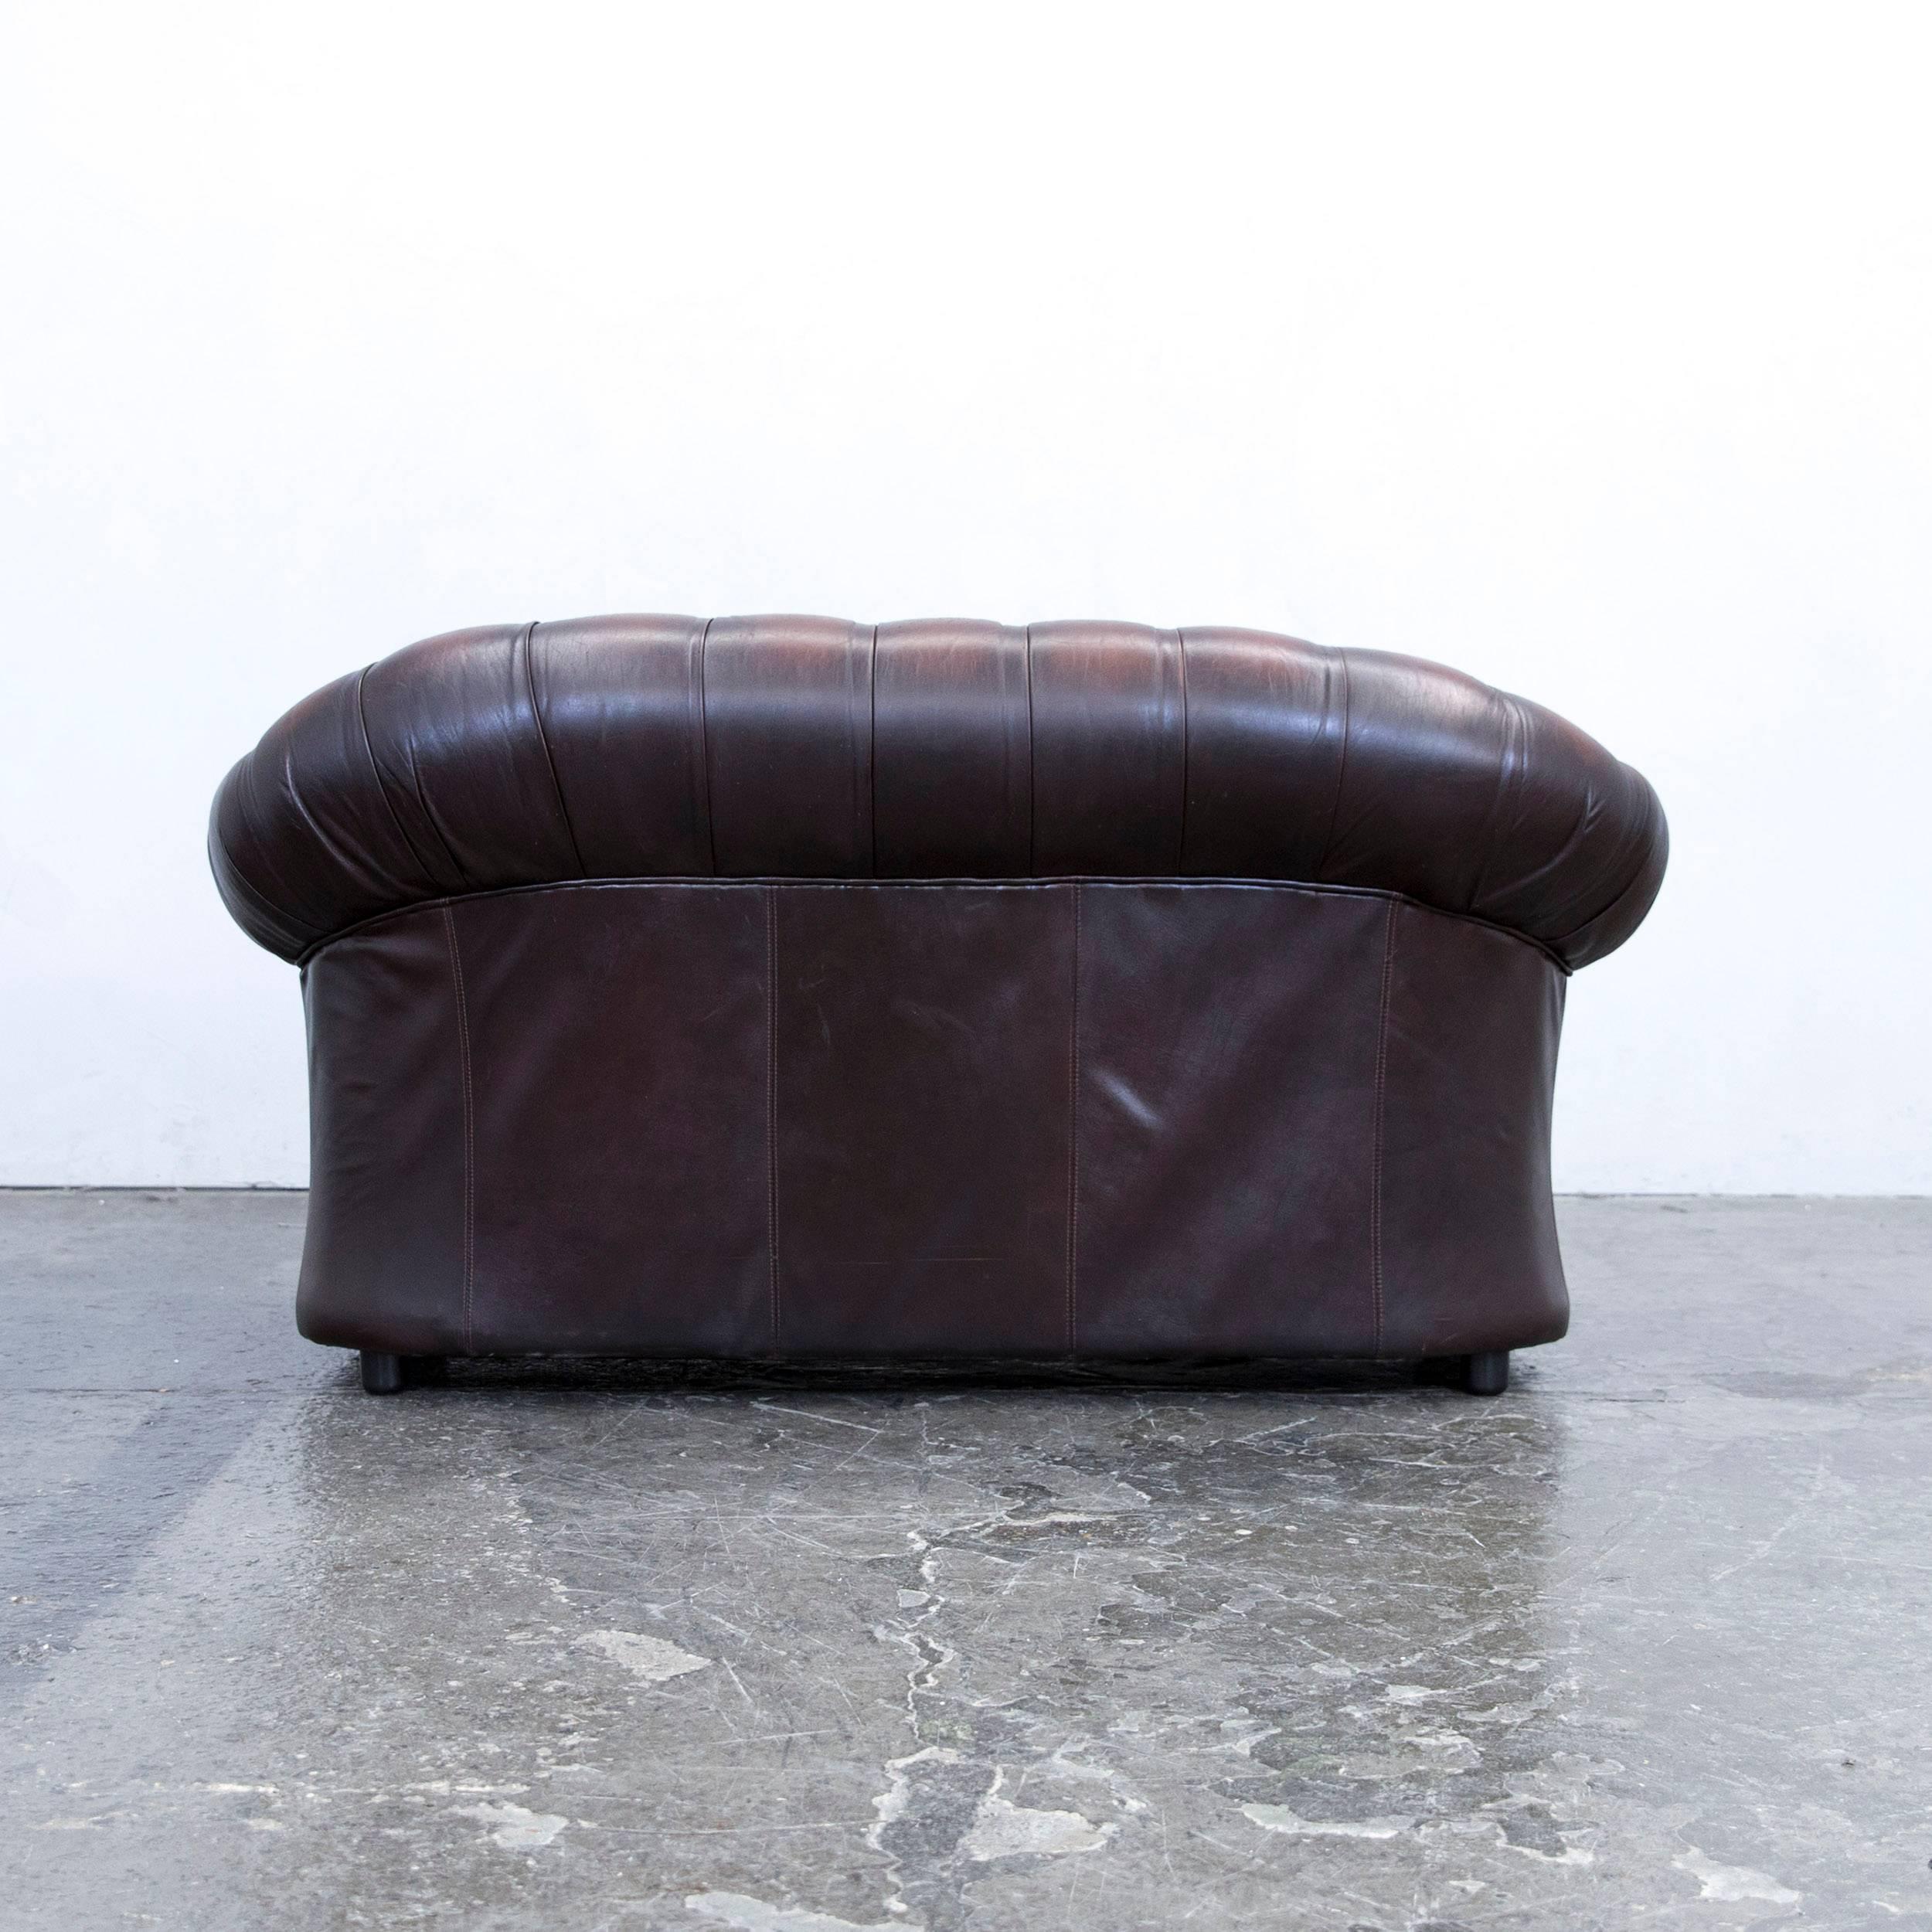 Chesterfield Centurion Leather Sofa Brown Red Two-Seat Vintage Retro 4